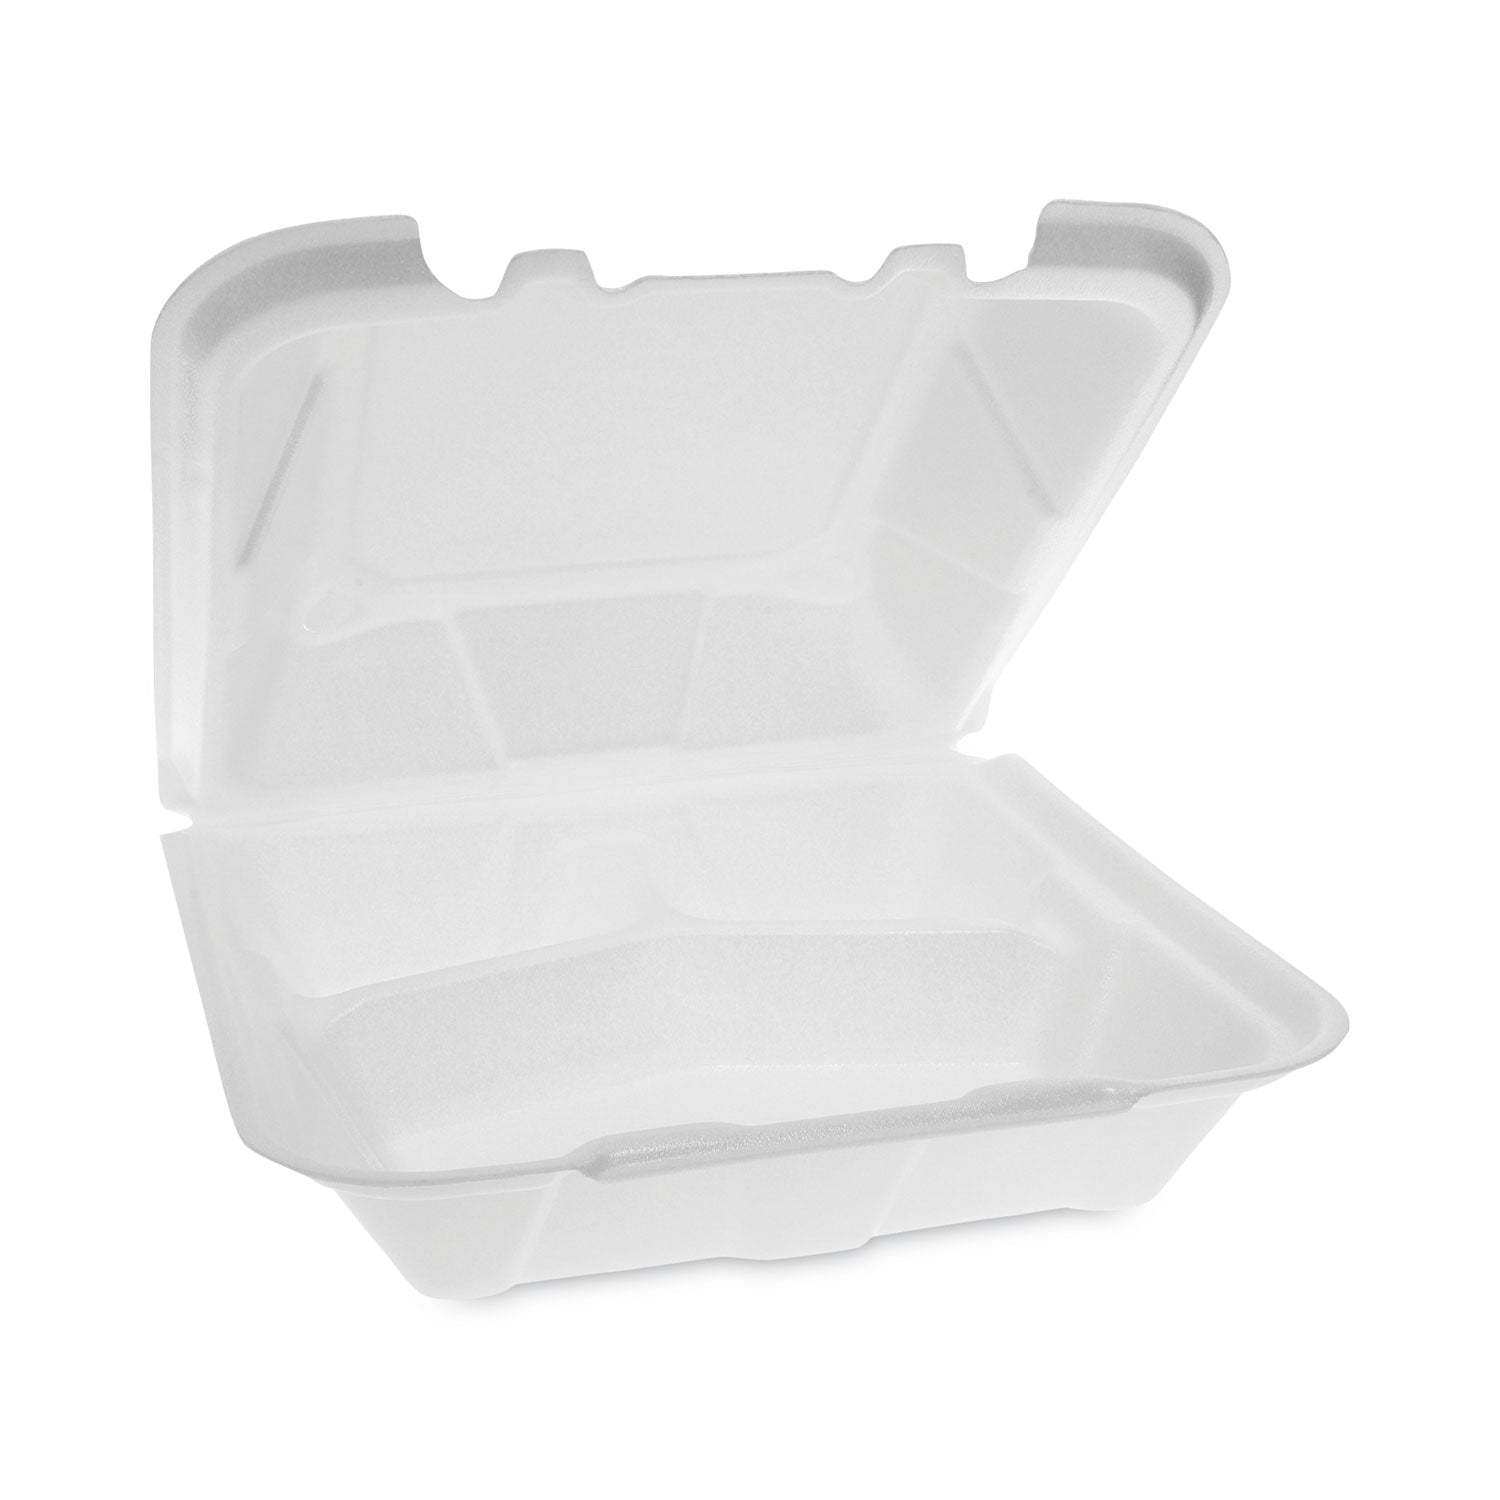 vented-foam-hinged-lid-container-dual-tab-lock-3-compartment-913-x-9-x-325-white-150-carton_pctytd199030000 - 2